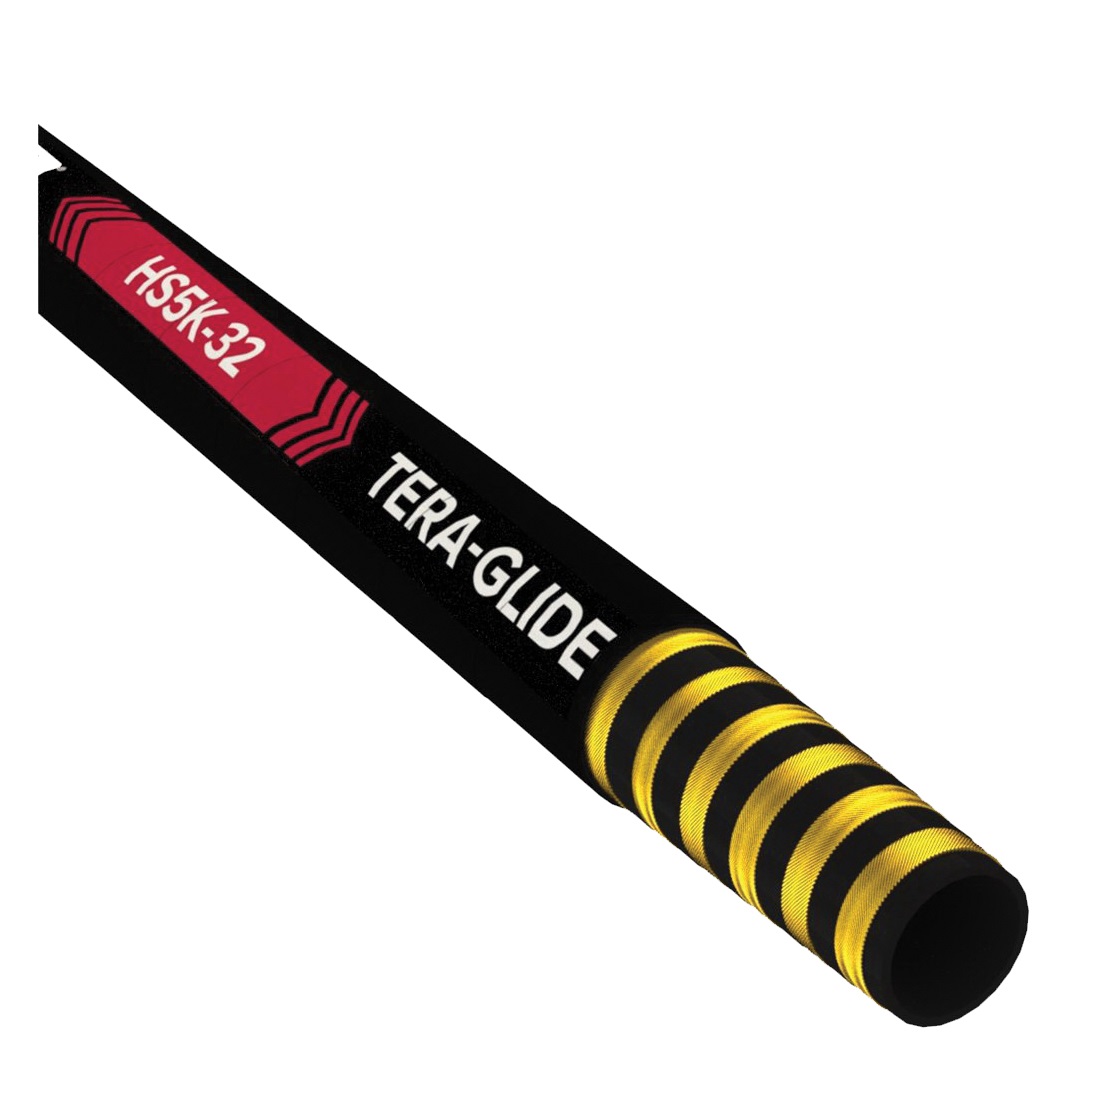 TEXCEL® TERA-GLIDE HS5K Series HS5K-32 Very High Pressure Hydraulic Hose, #32 Nominal, 5100 psi, Synthetic Rubber Tube